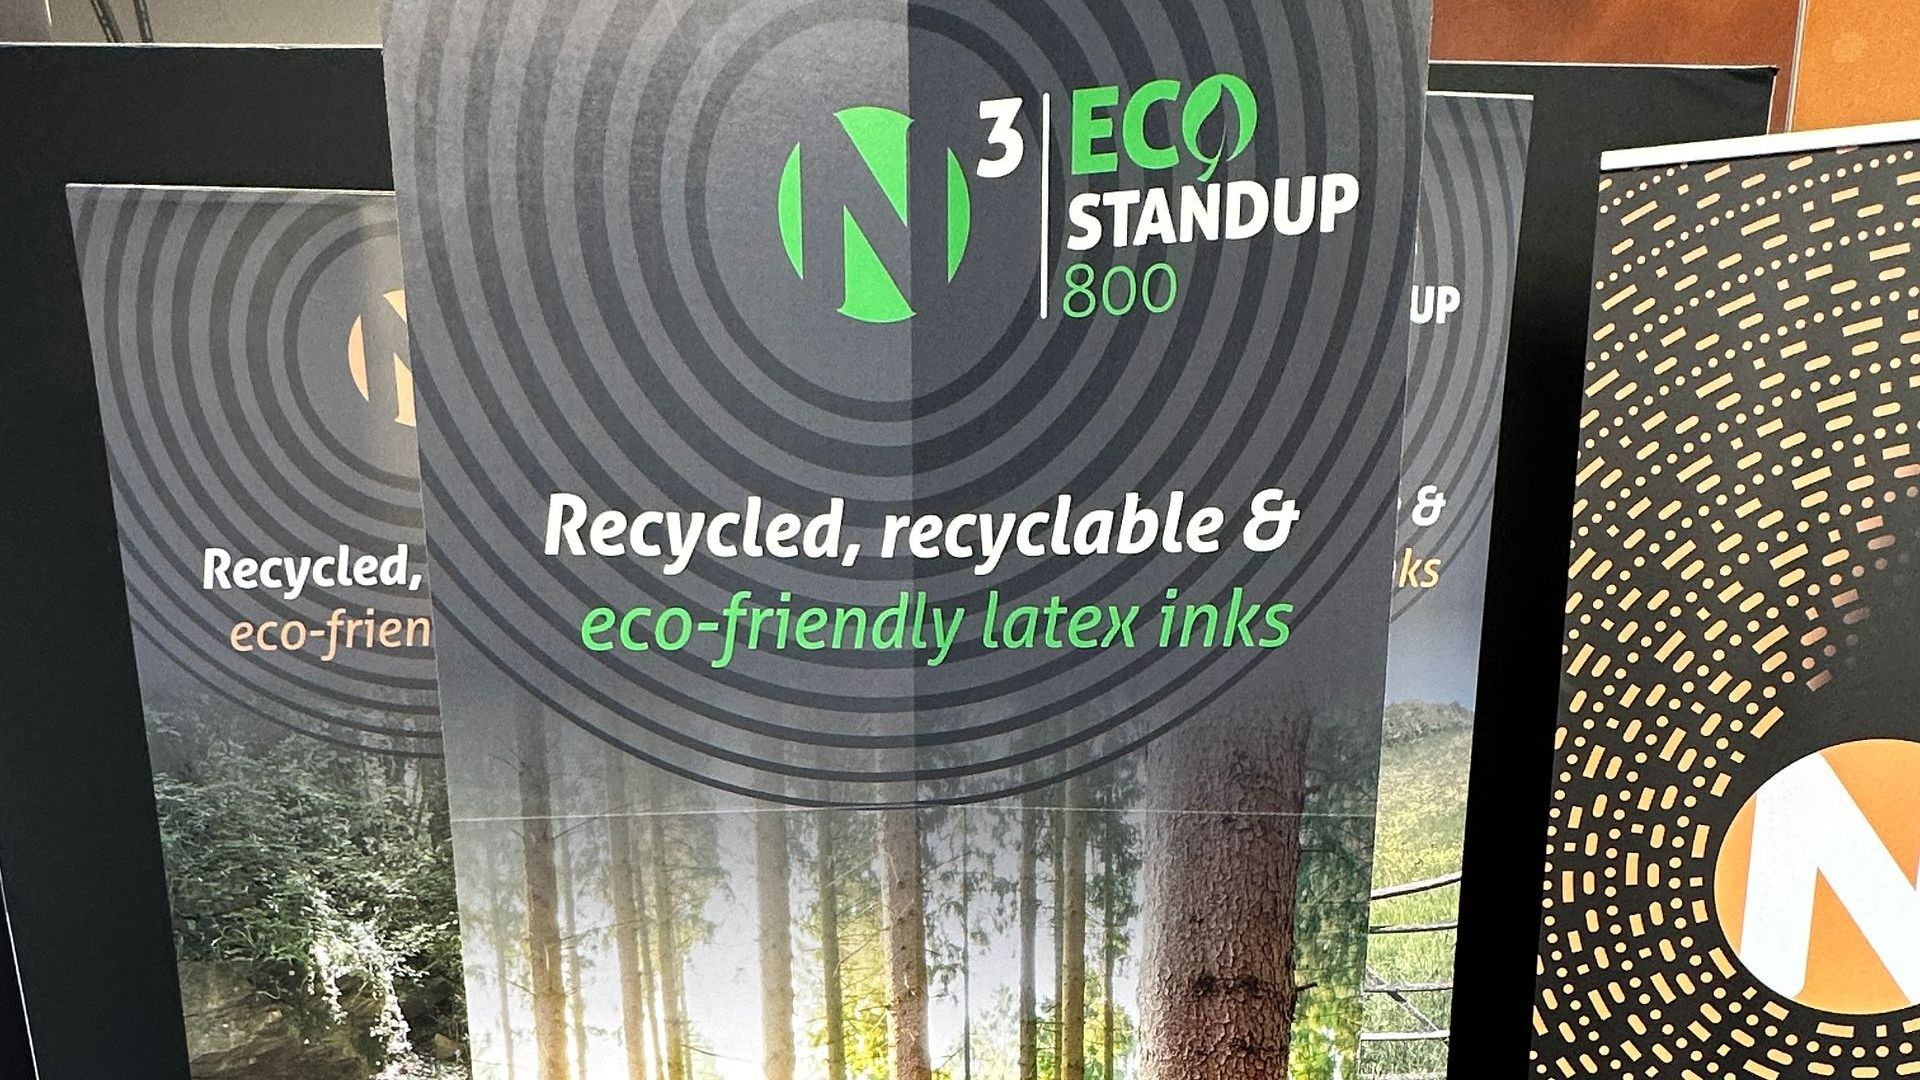 A book that says recycled recyclable and eco-friendly latex inks